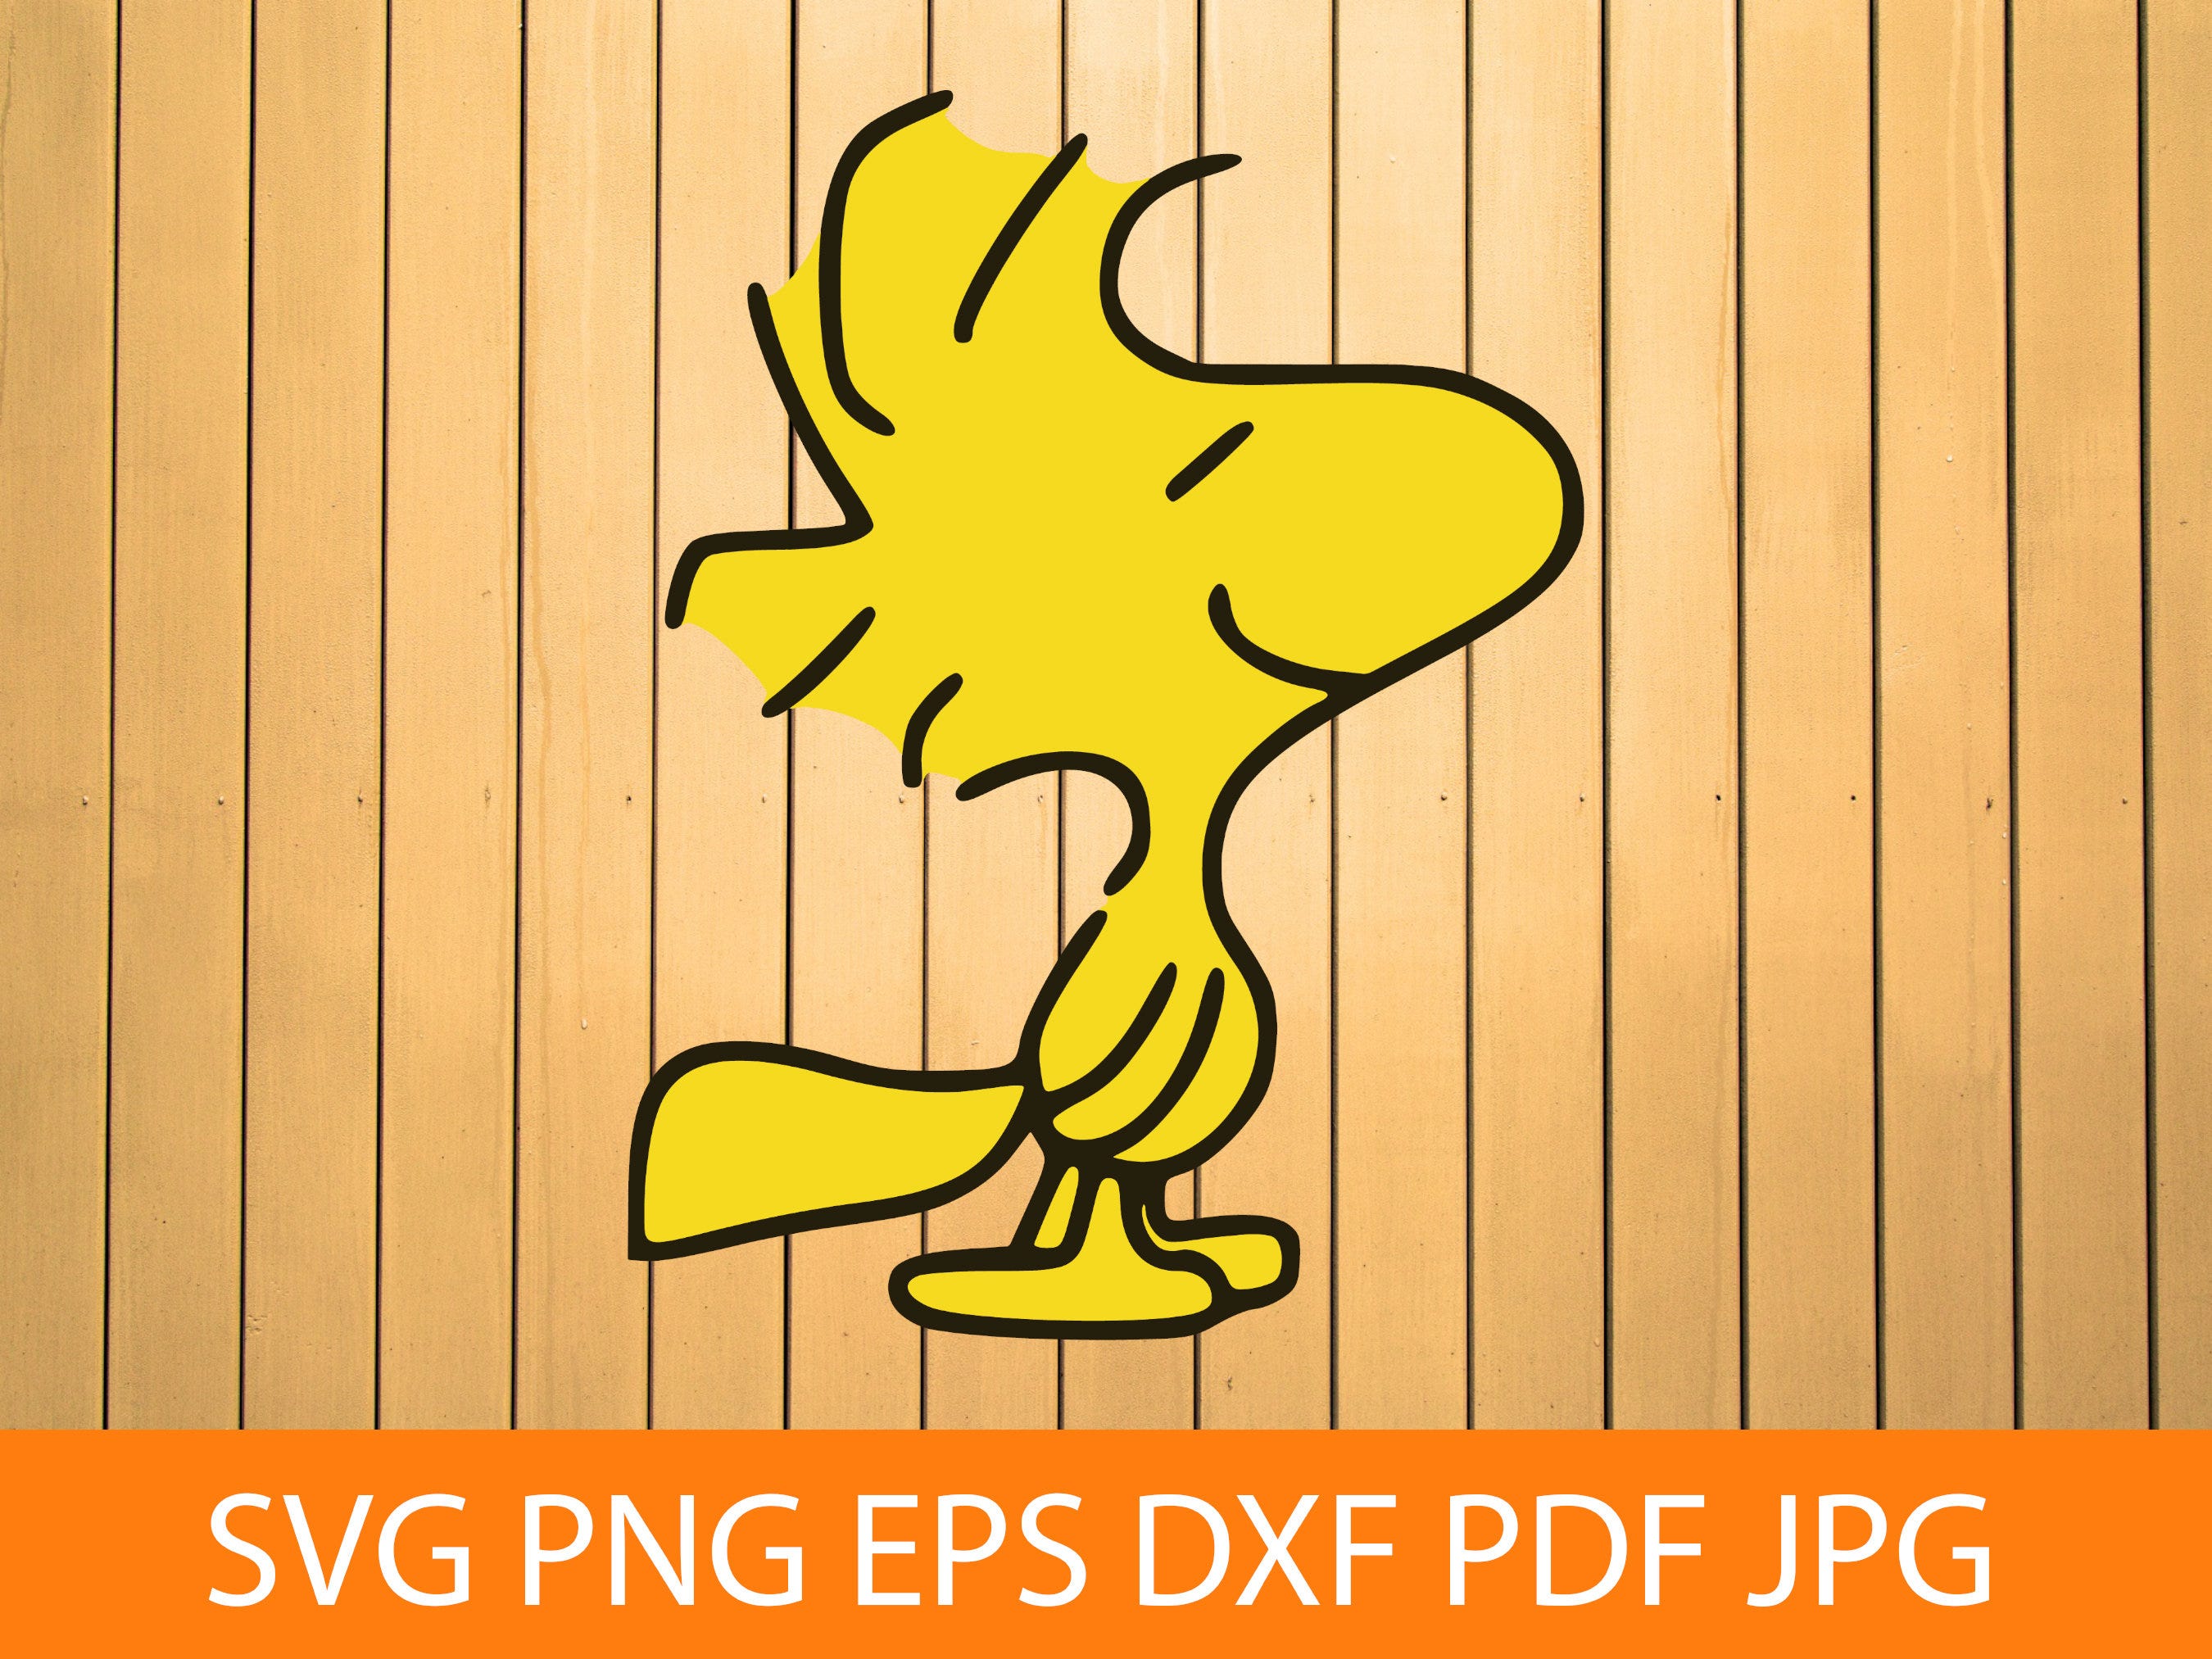 Woodstock SVG PNG DXF